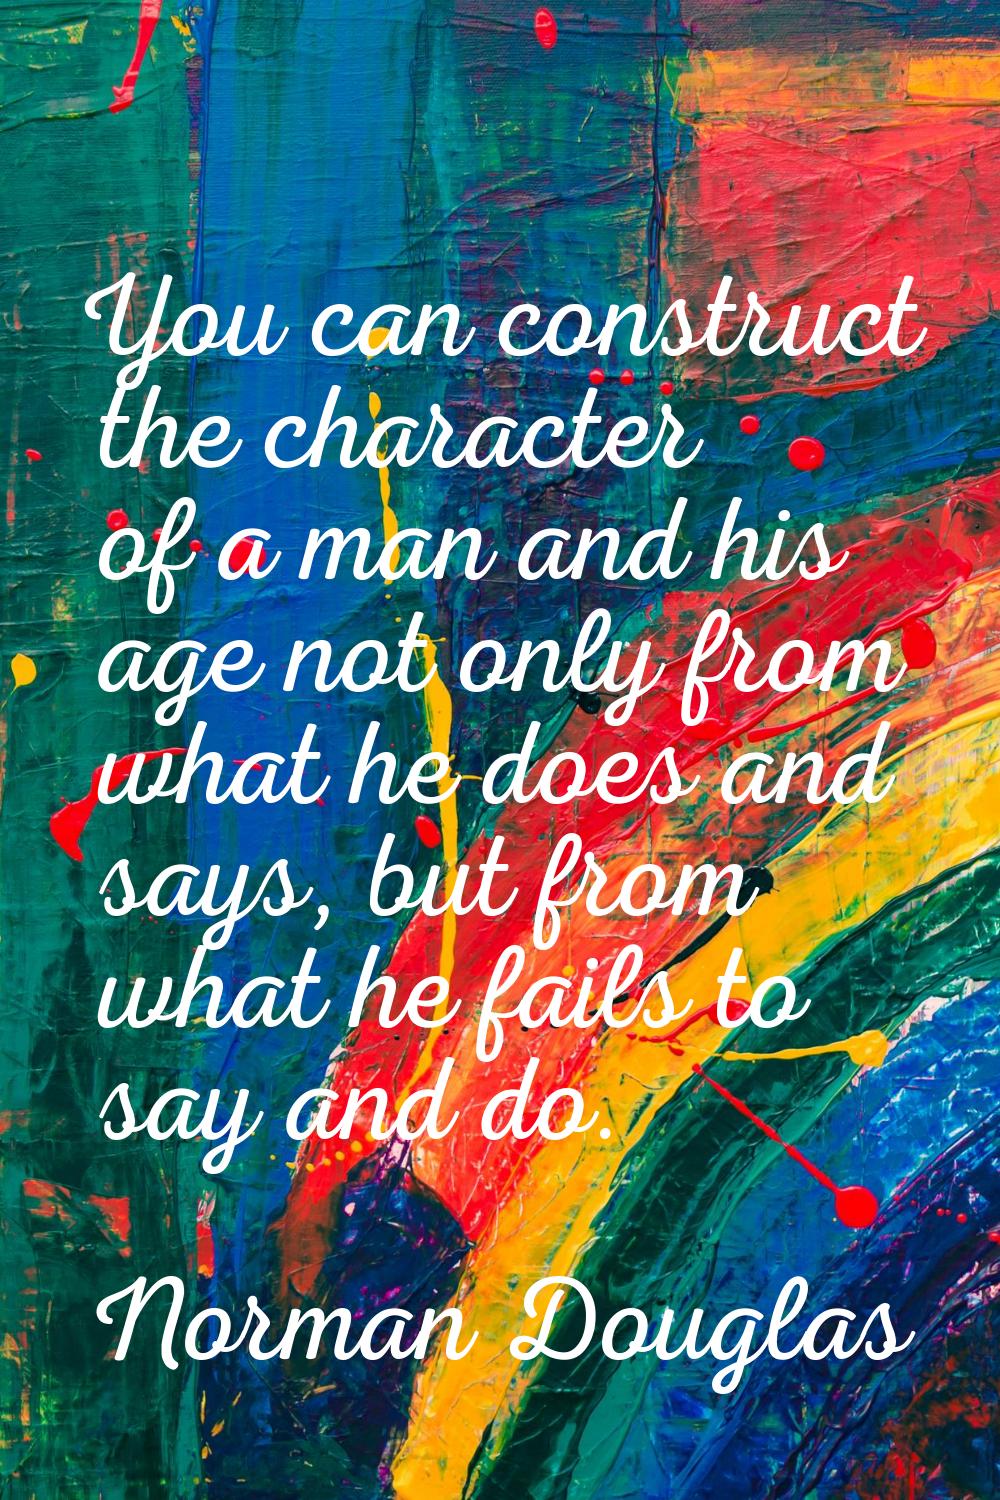 You can construct the character of a man and his age not only from what he does and says, but from 